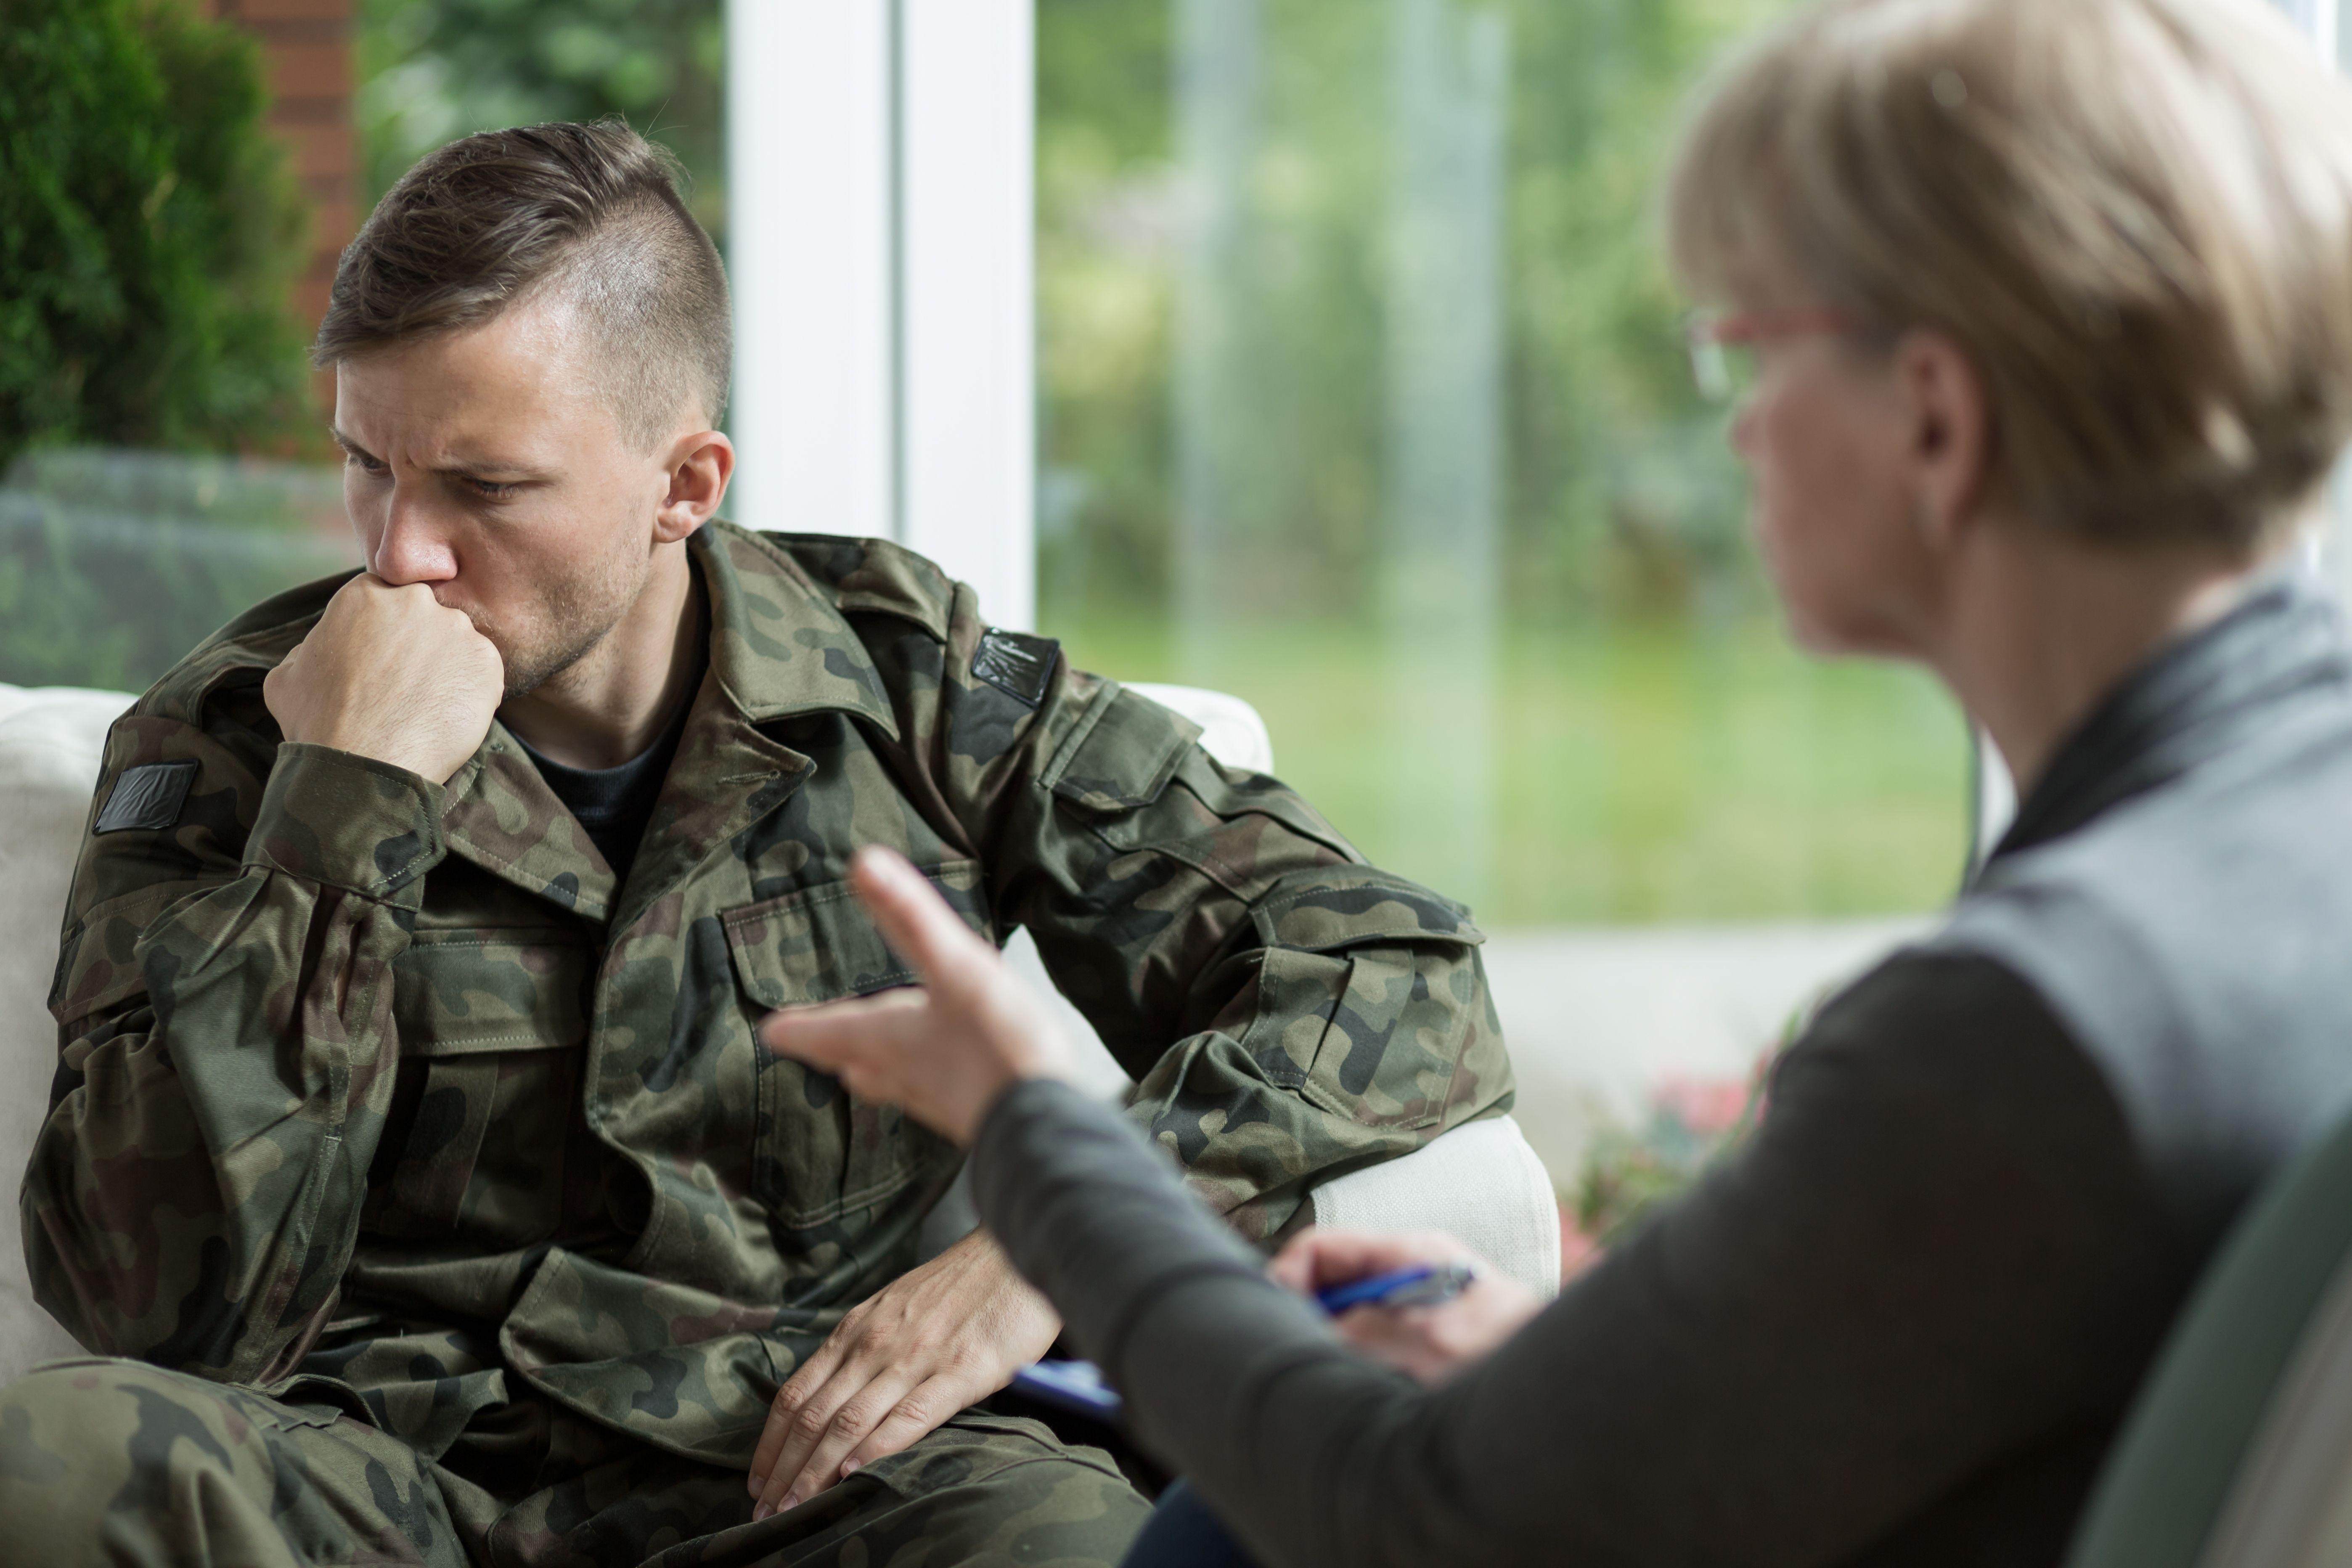 Veteran being counselled